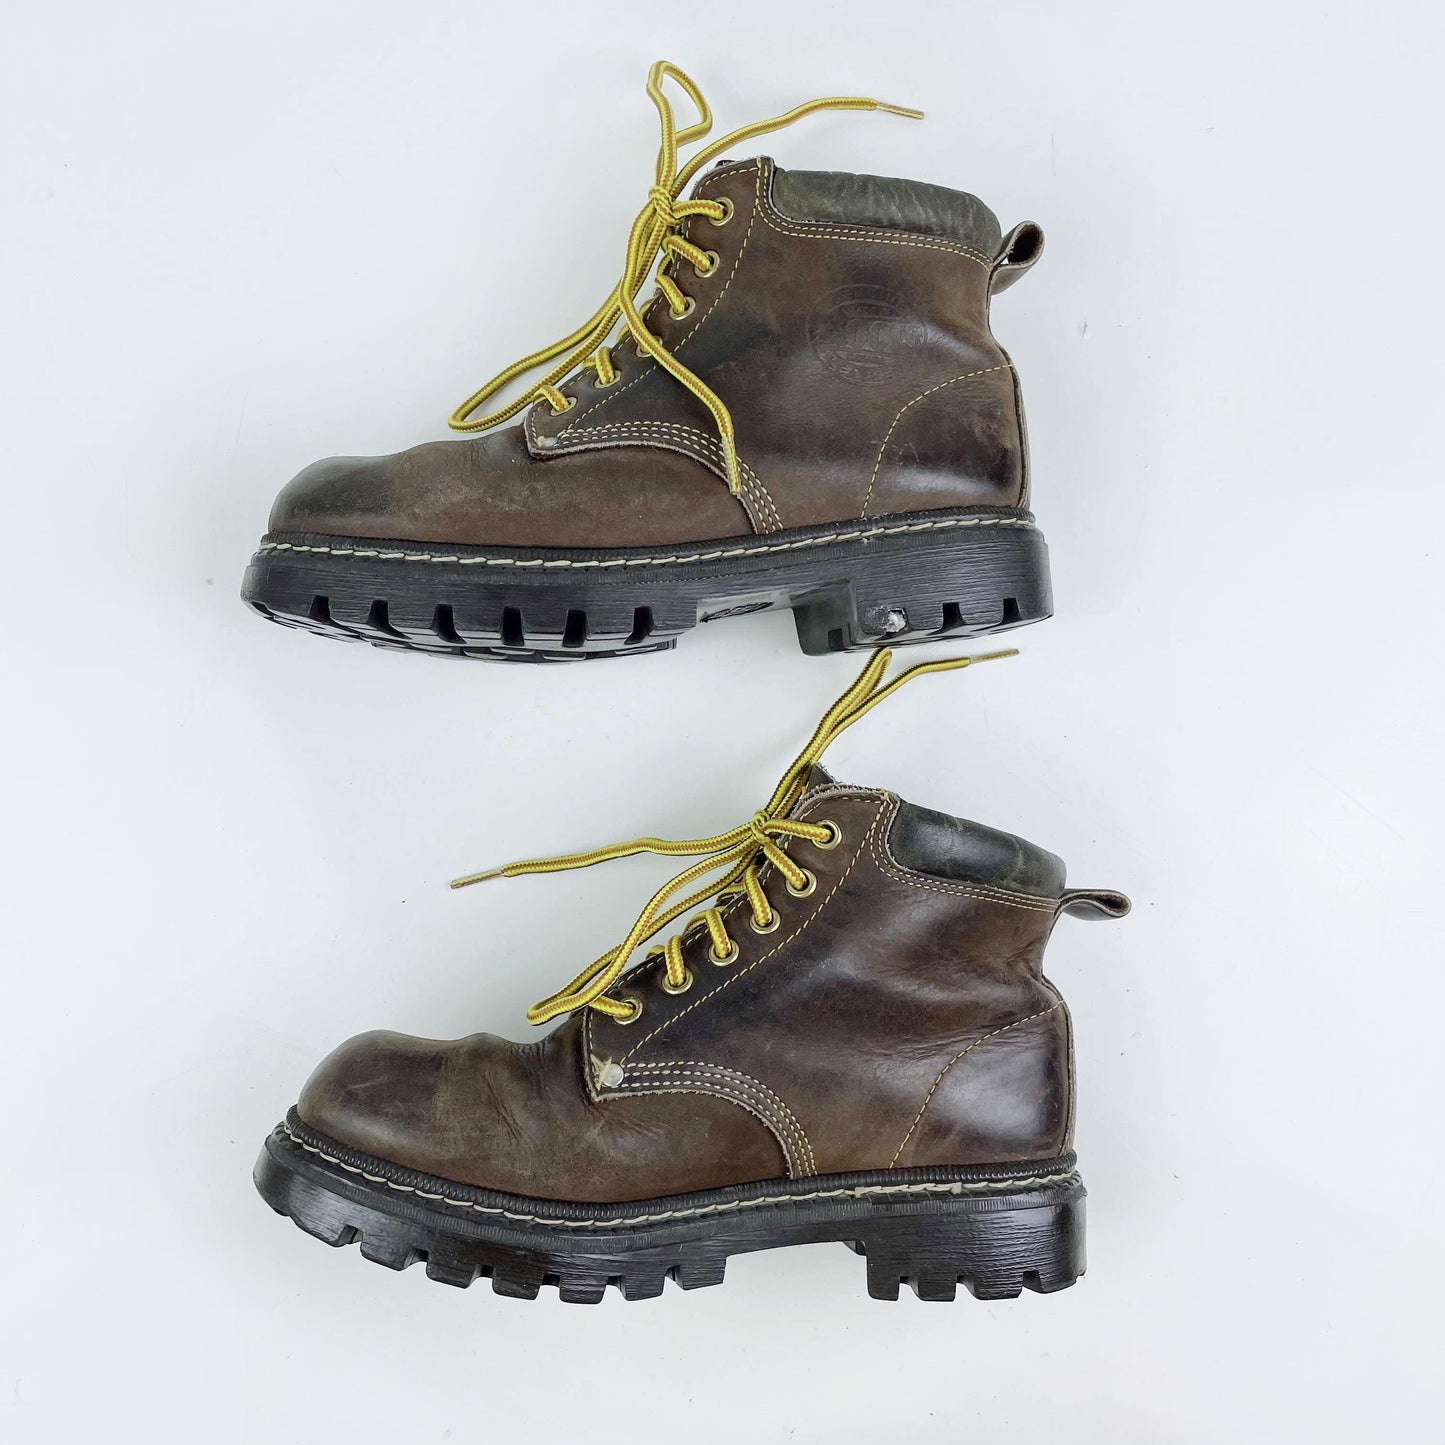 vintage 00s roots tuff leather hiking boots - size 6